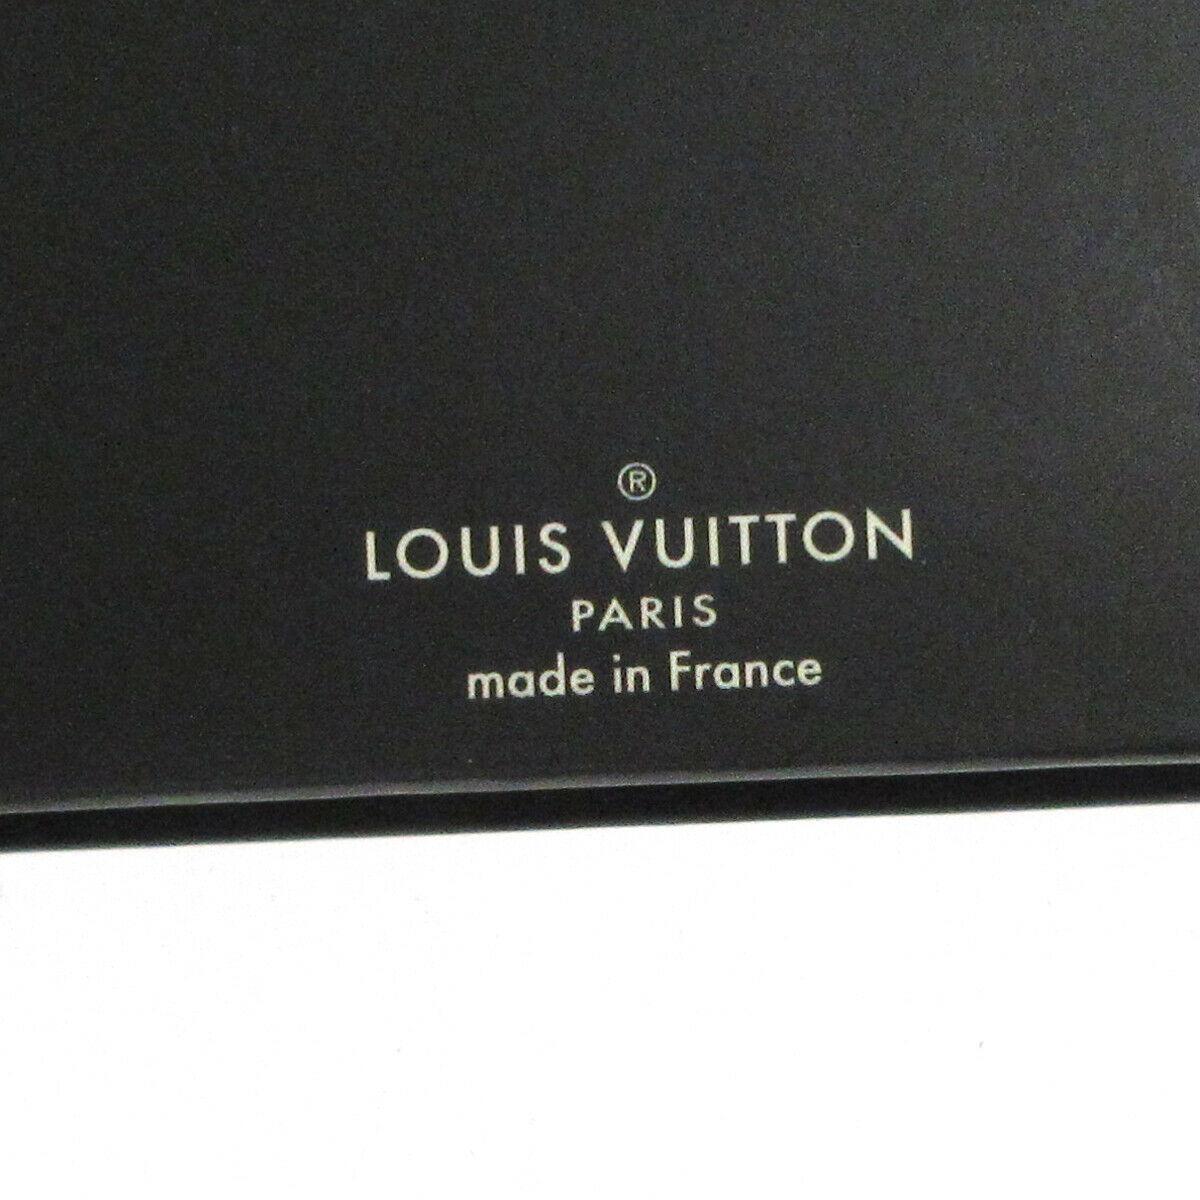 Louis Vuitton Monogram Multicolor White Black Novelty Card Deck of Cards in Box im Zustand „Gut“ in Chicago, IL